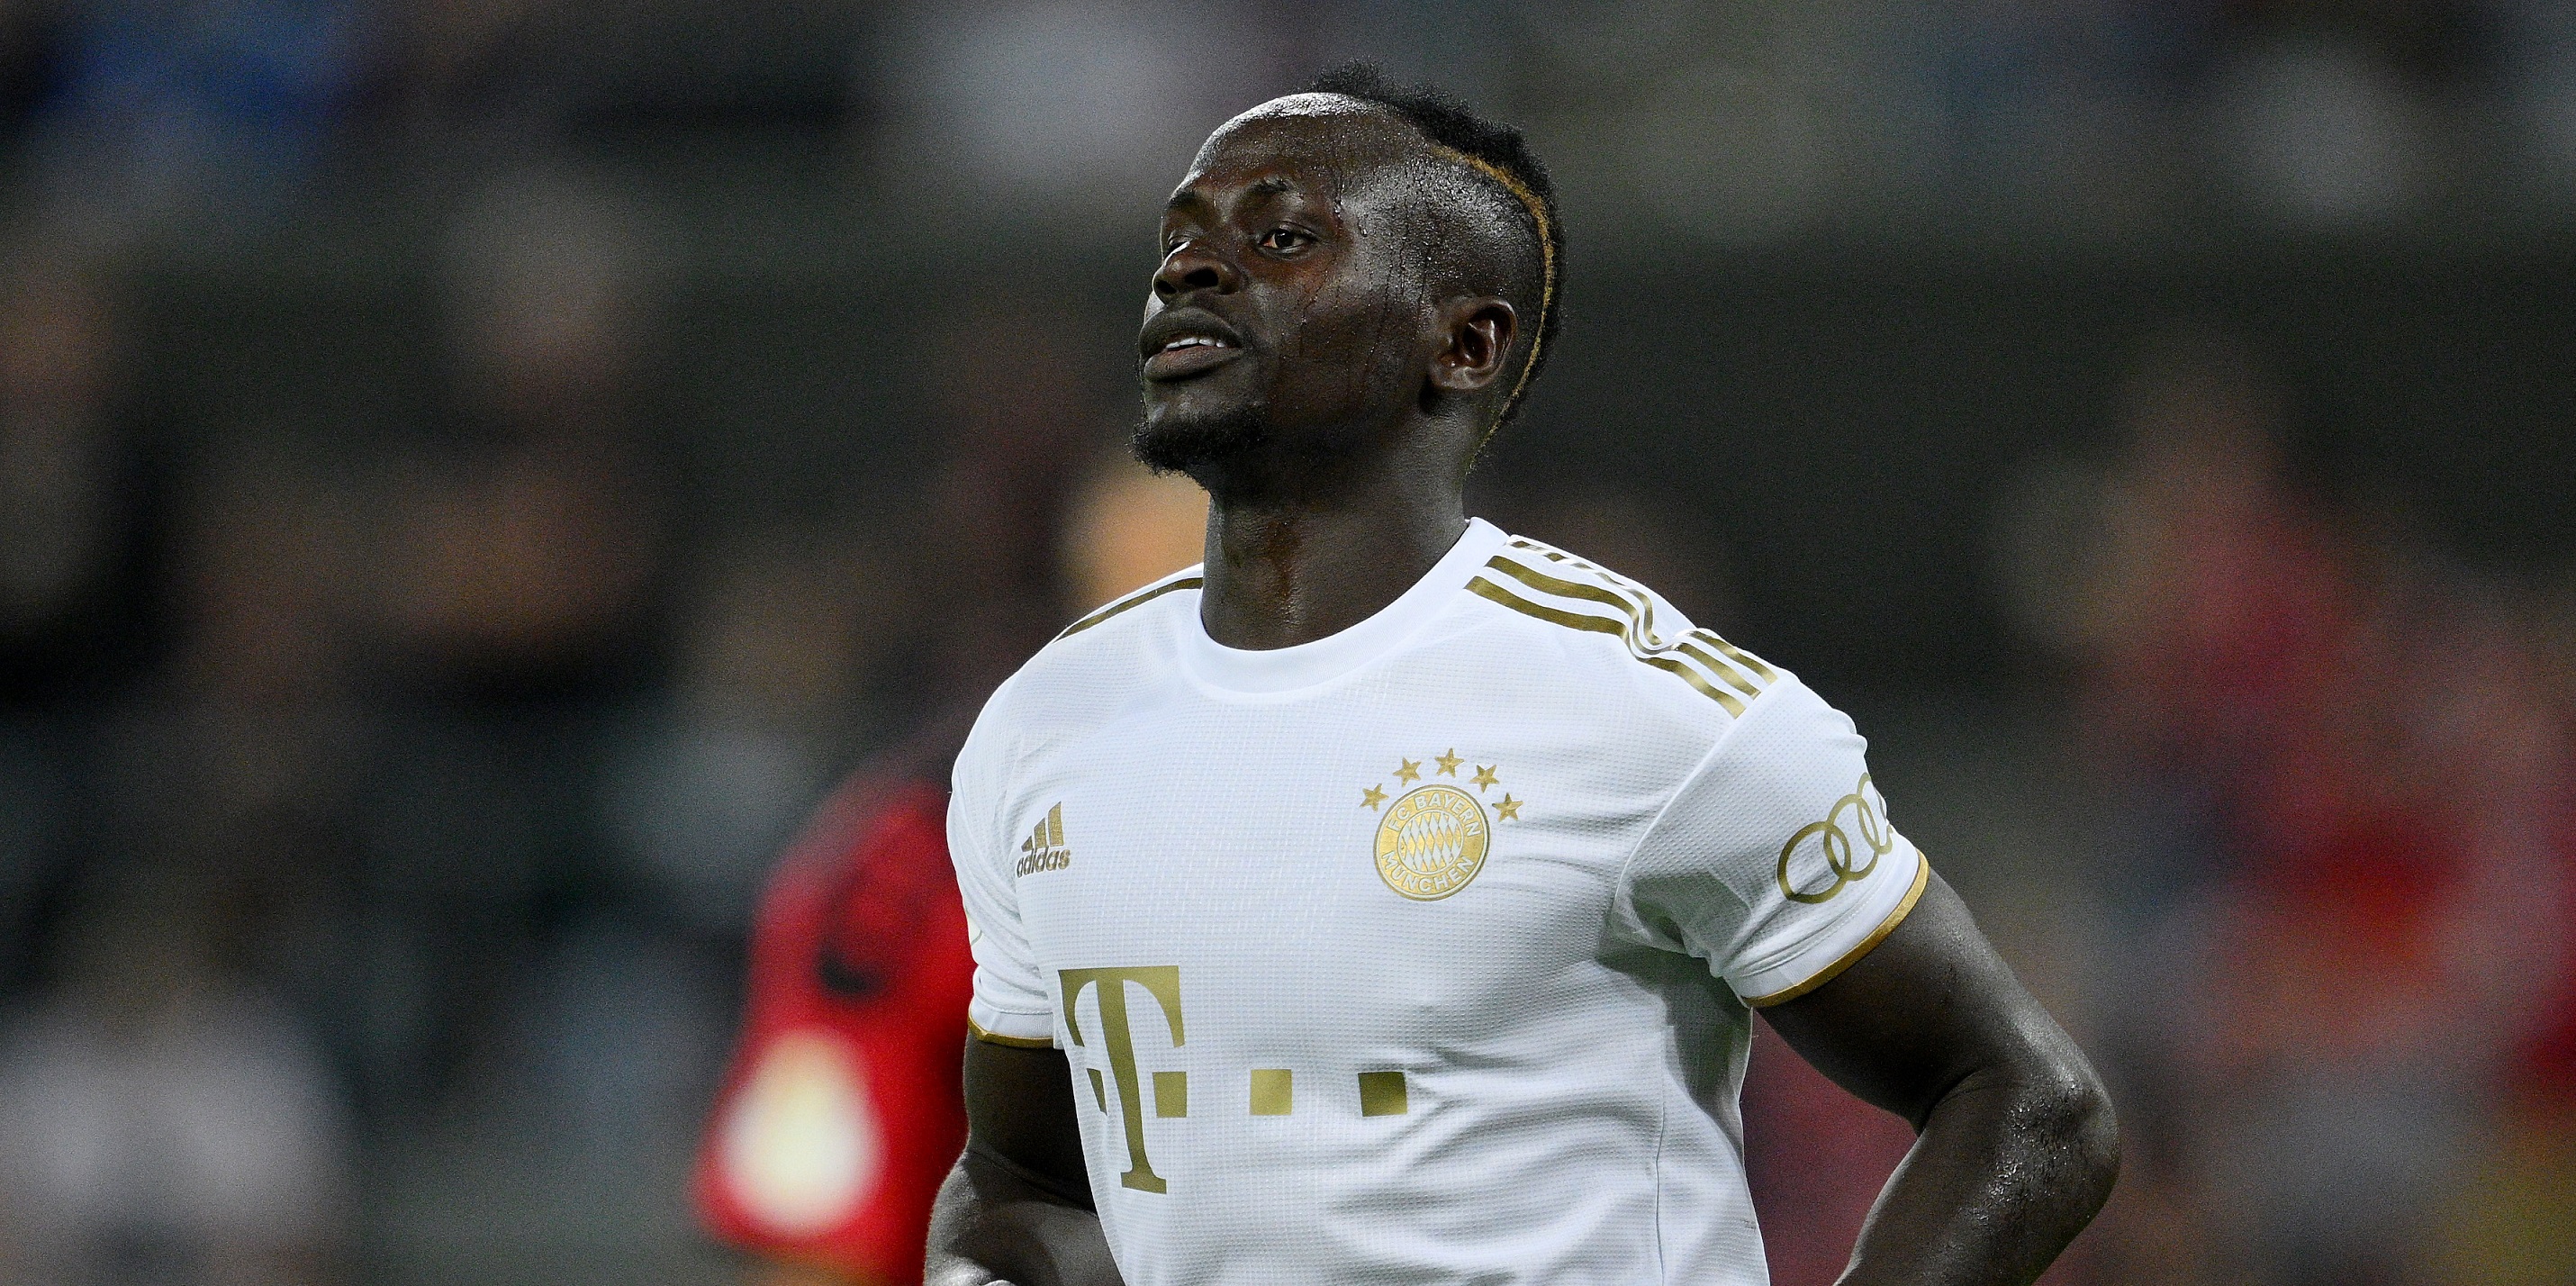 Dietmar Hamann tells Bayern Munich to ‘get a grip’ on Sadio Mane’s performances with the Senegal star looking ‘isolated’